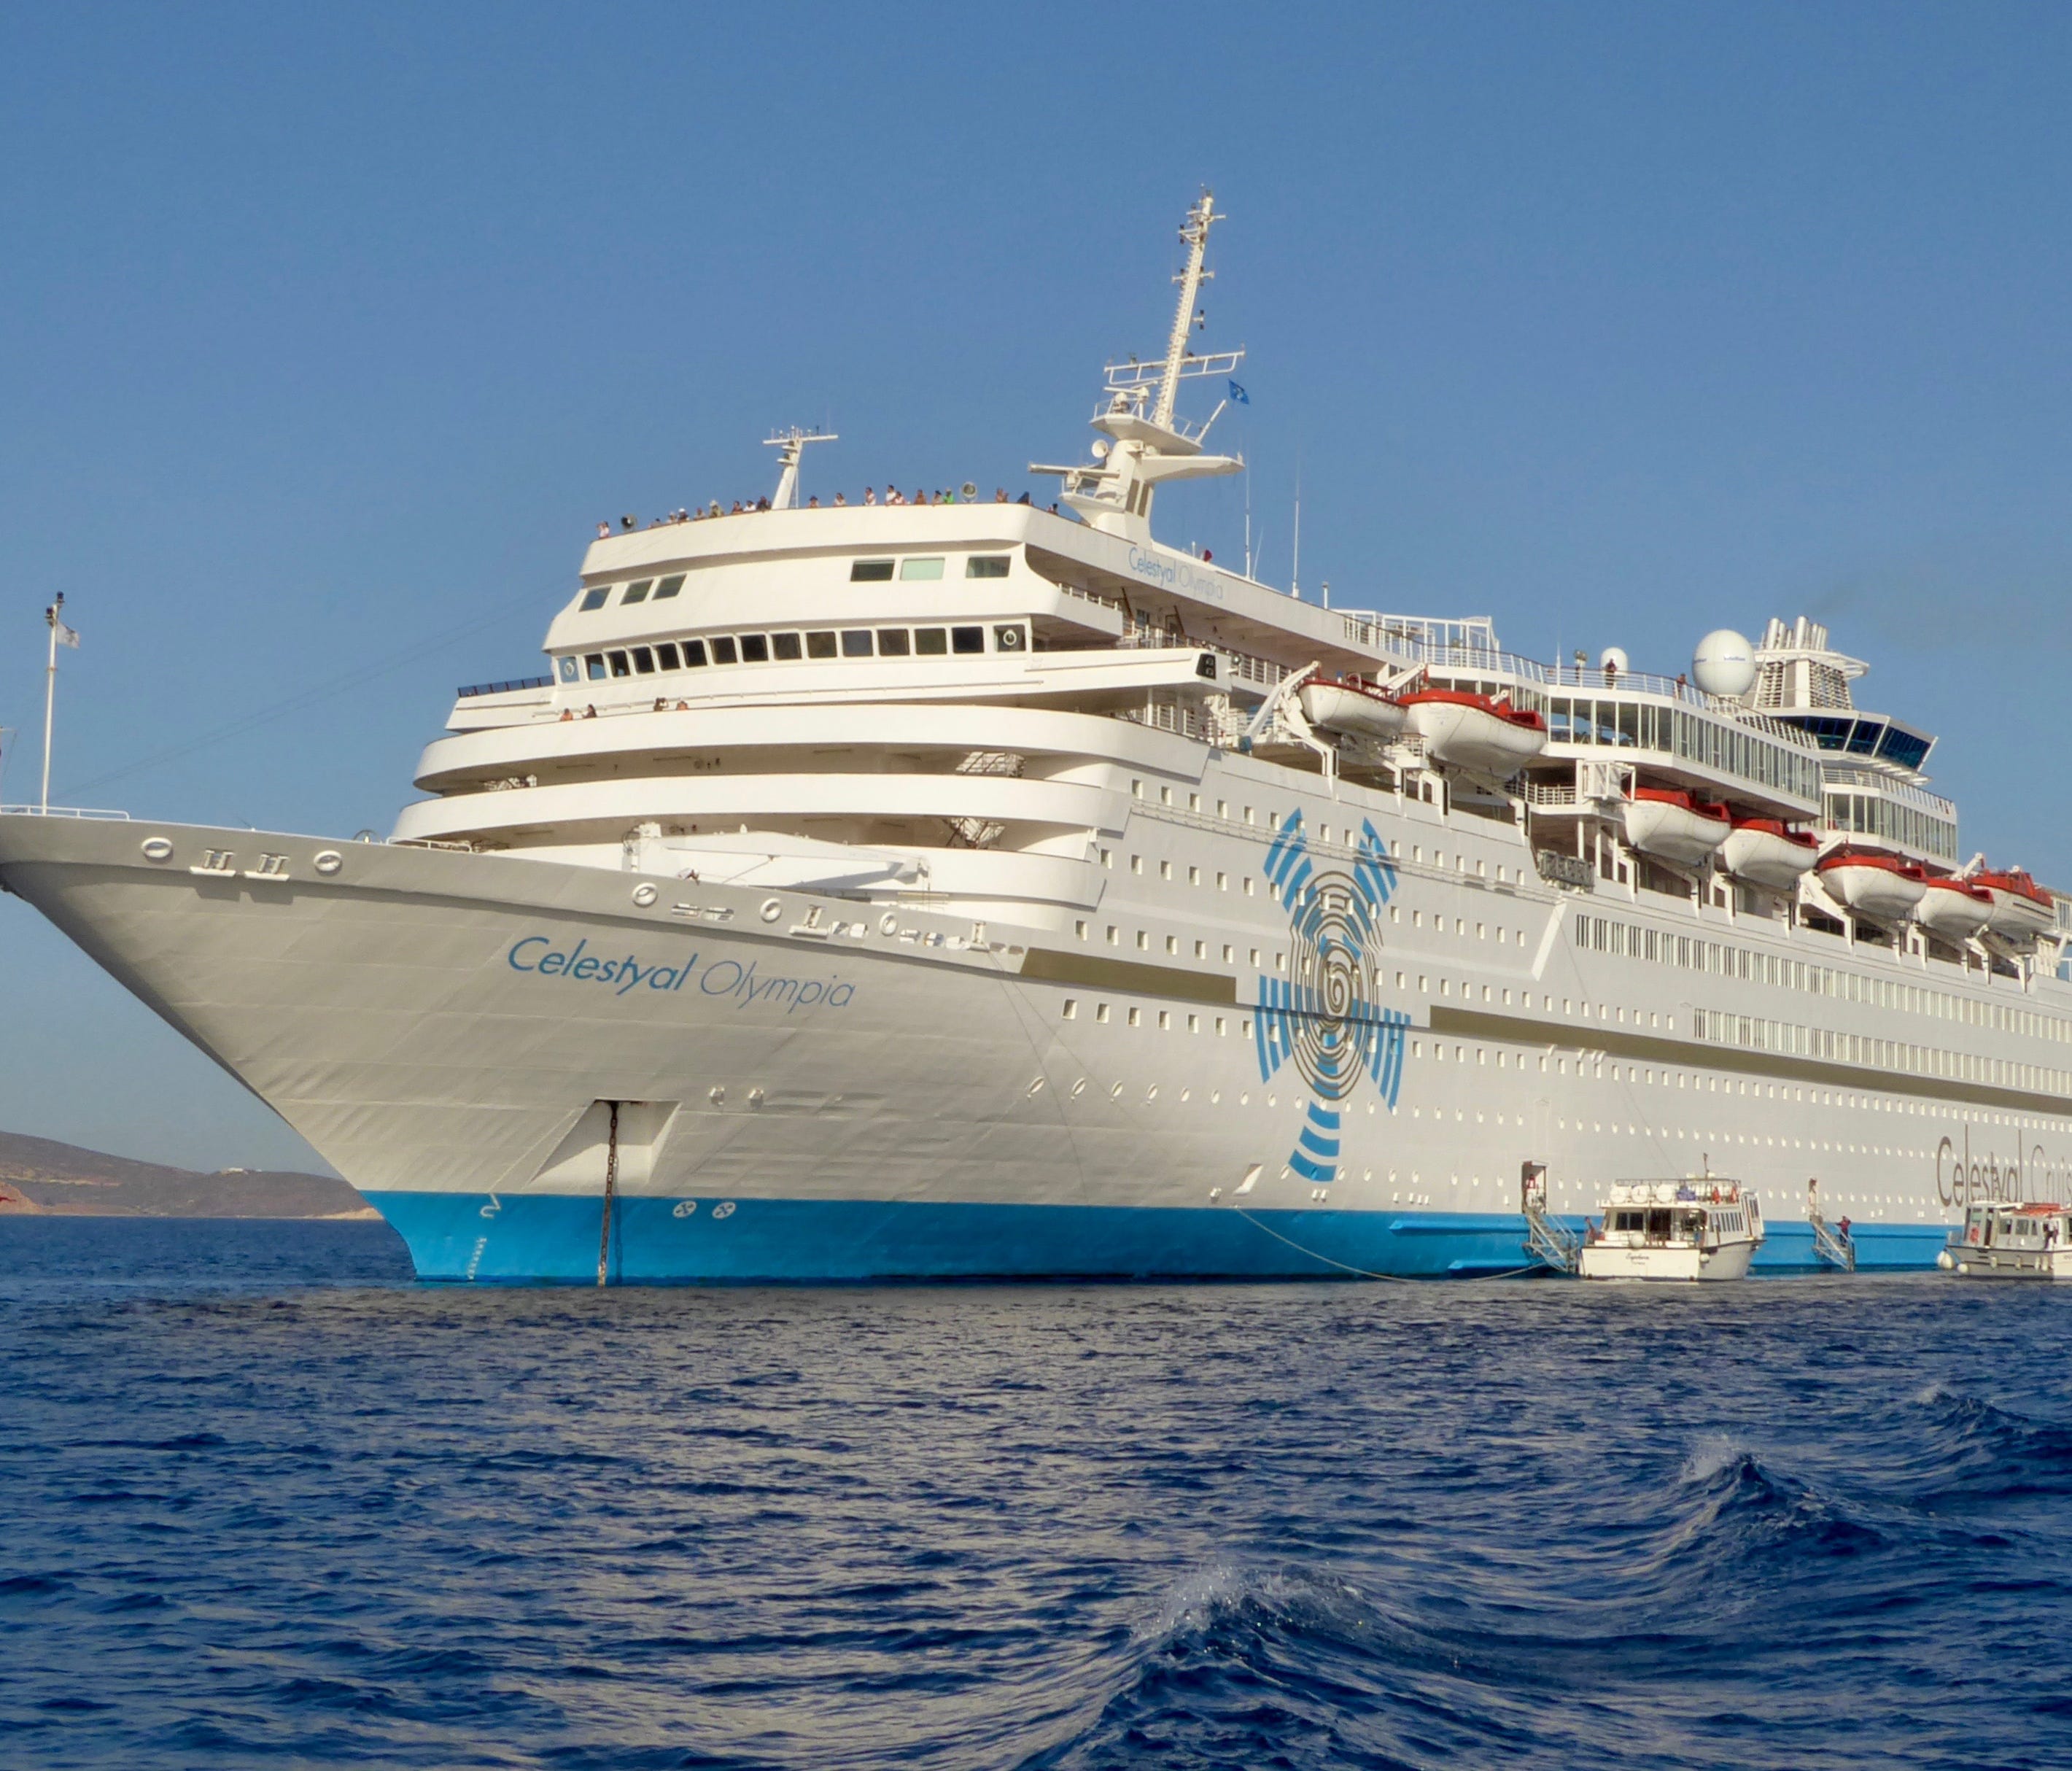 Celestyal Cruises' 37,773-gross-ton, 1,575-guest  Celestyal Olympia is a rare, mid-sized cruise ship that caters to a value-conscious clientele. This handsome vessel boasts a number of classic features that no longer exist on many of the new mega cru